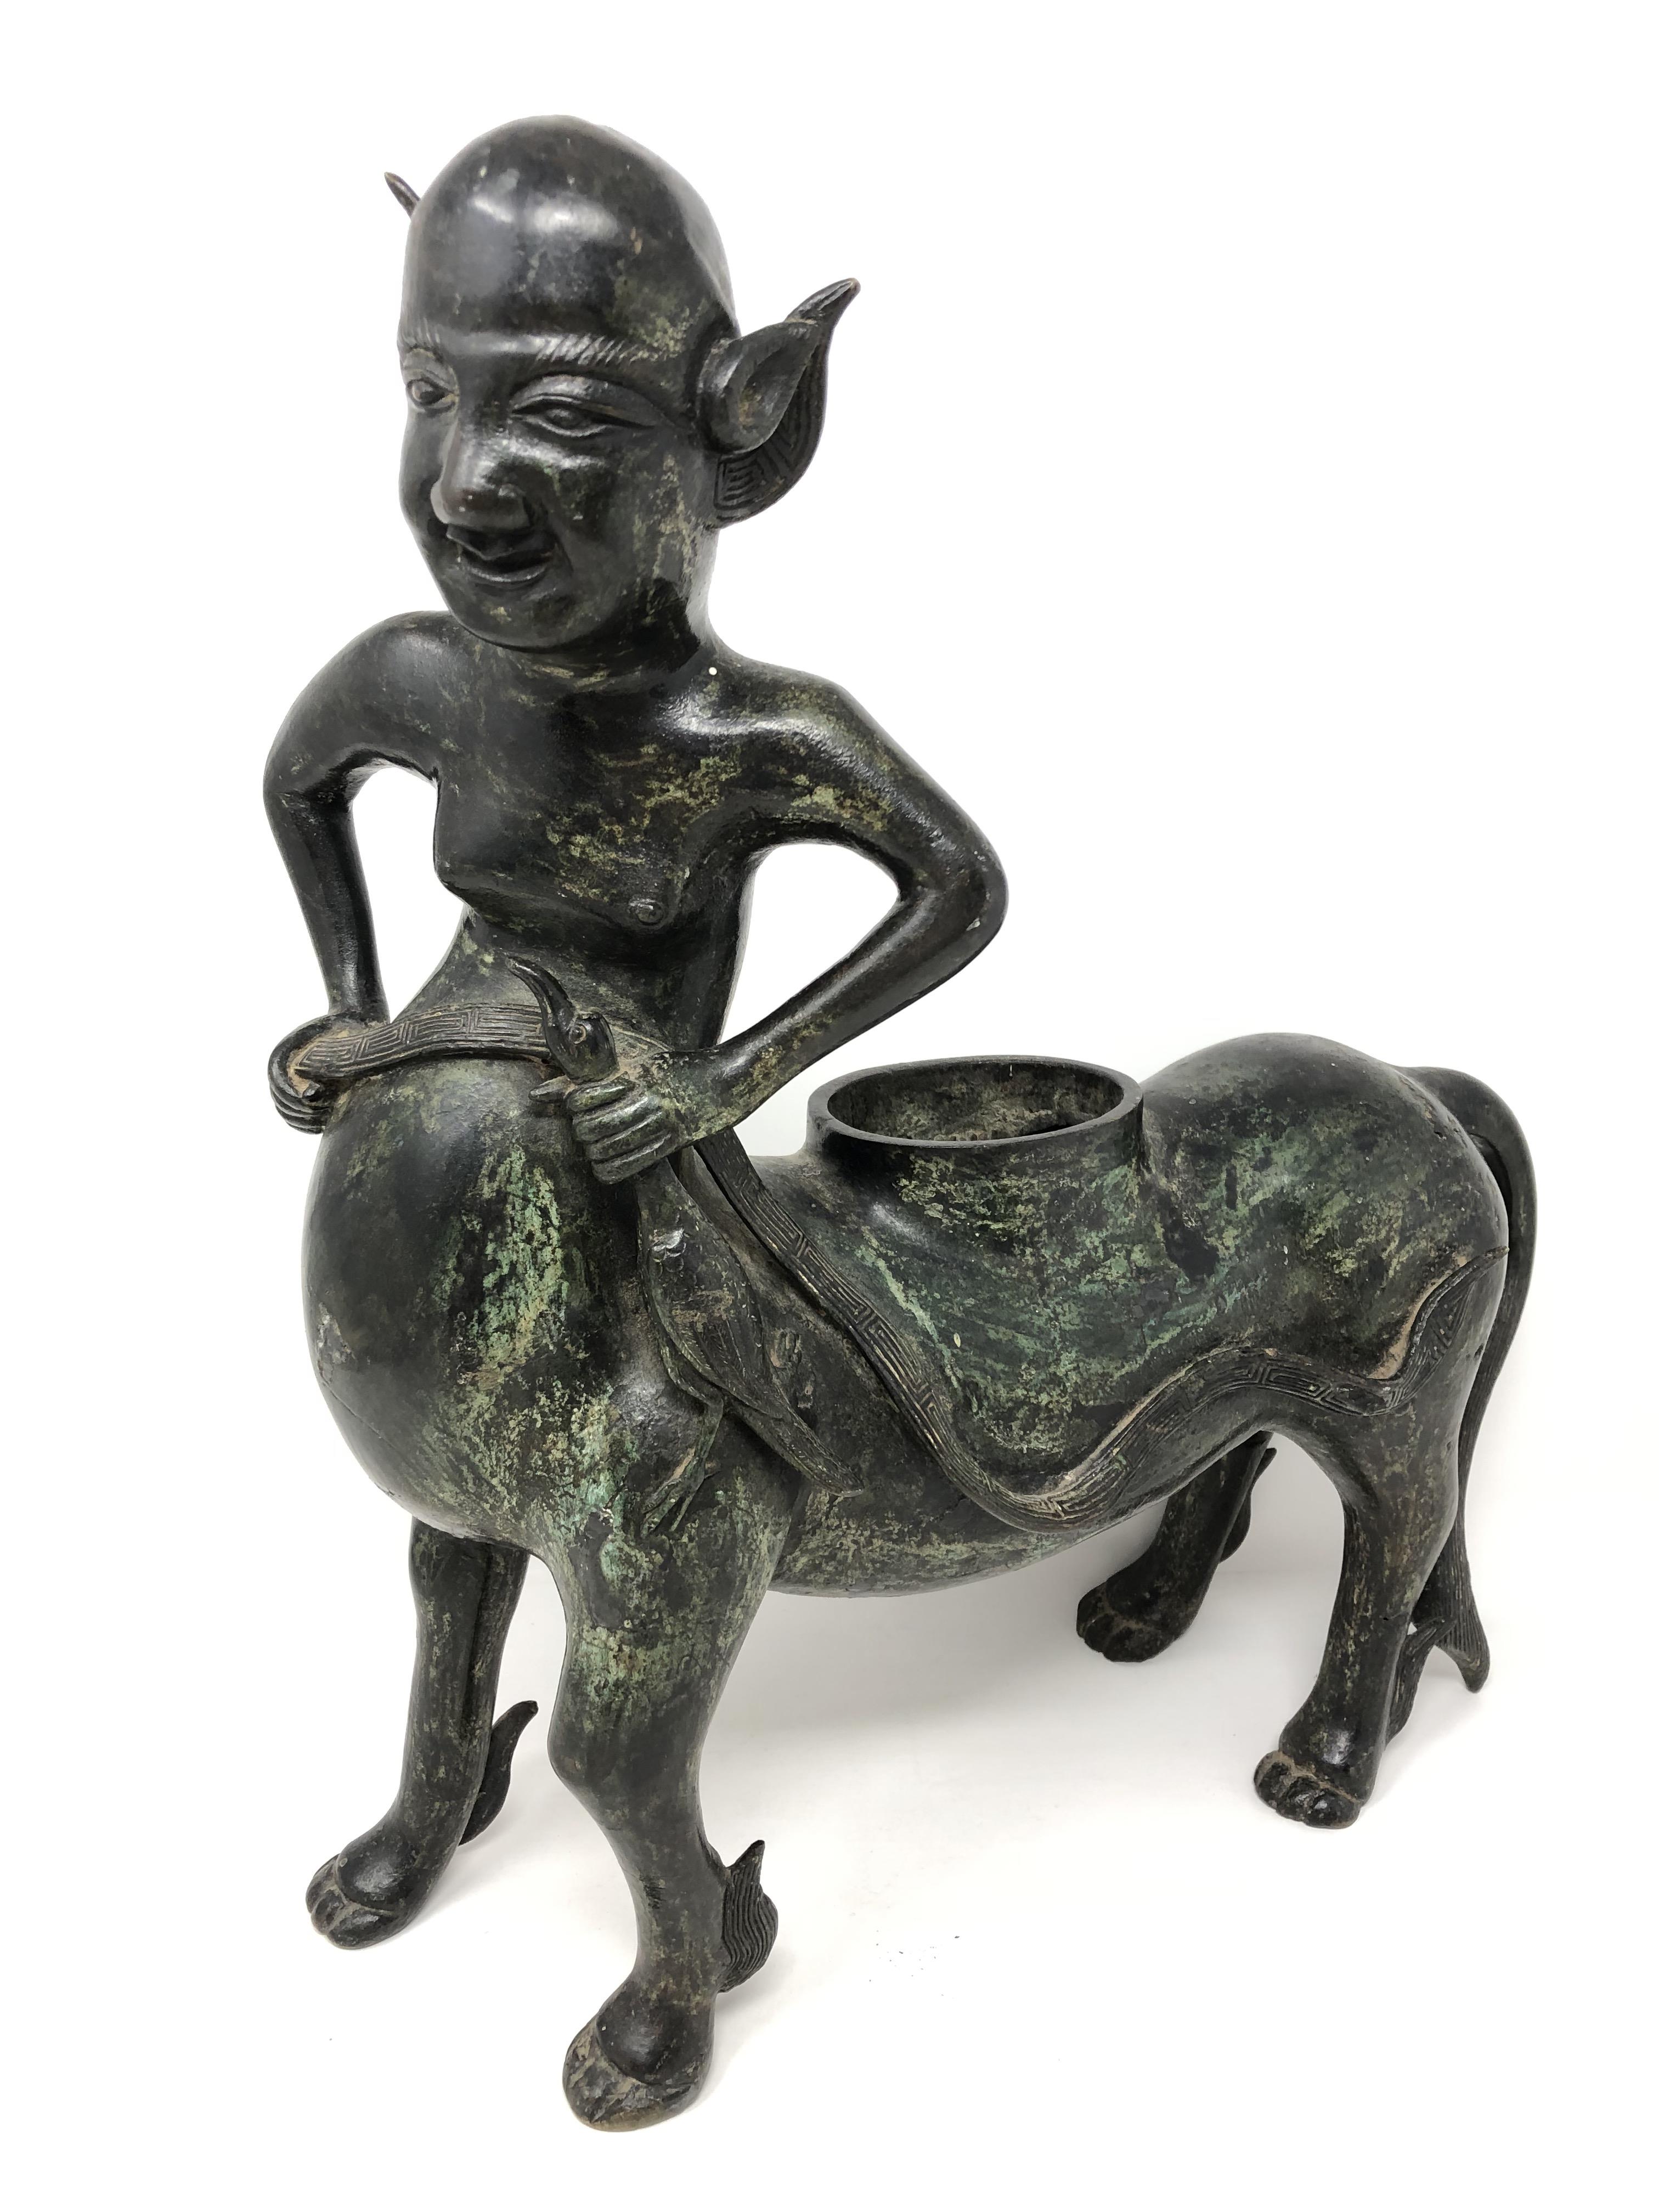 A South-East Asian patinated bronze censer in the form of a centaur-type creature with winged